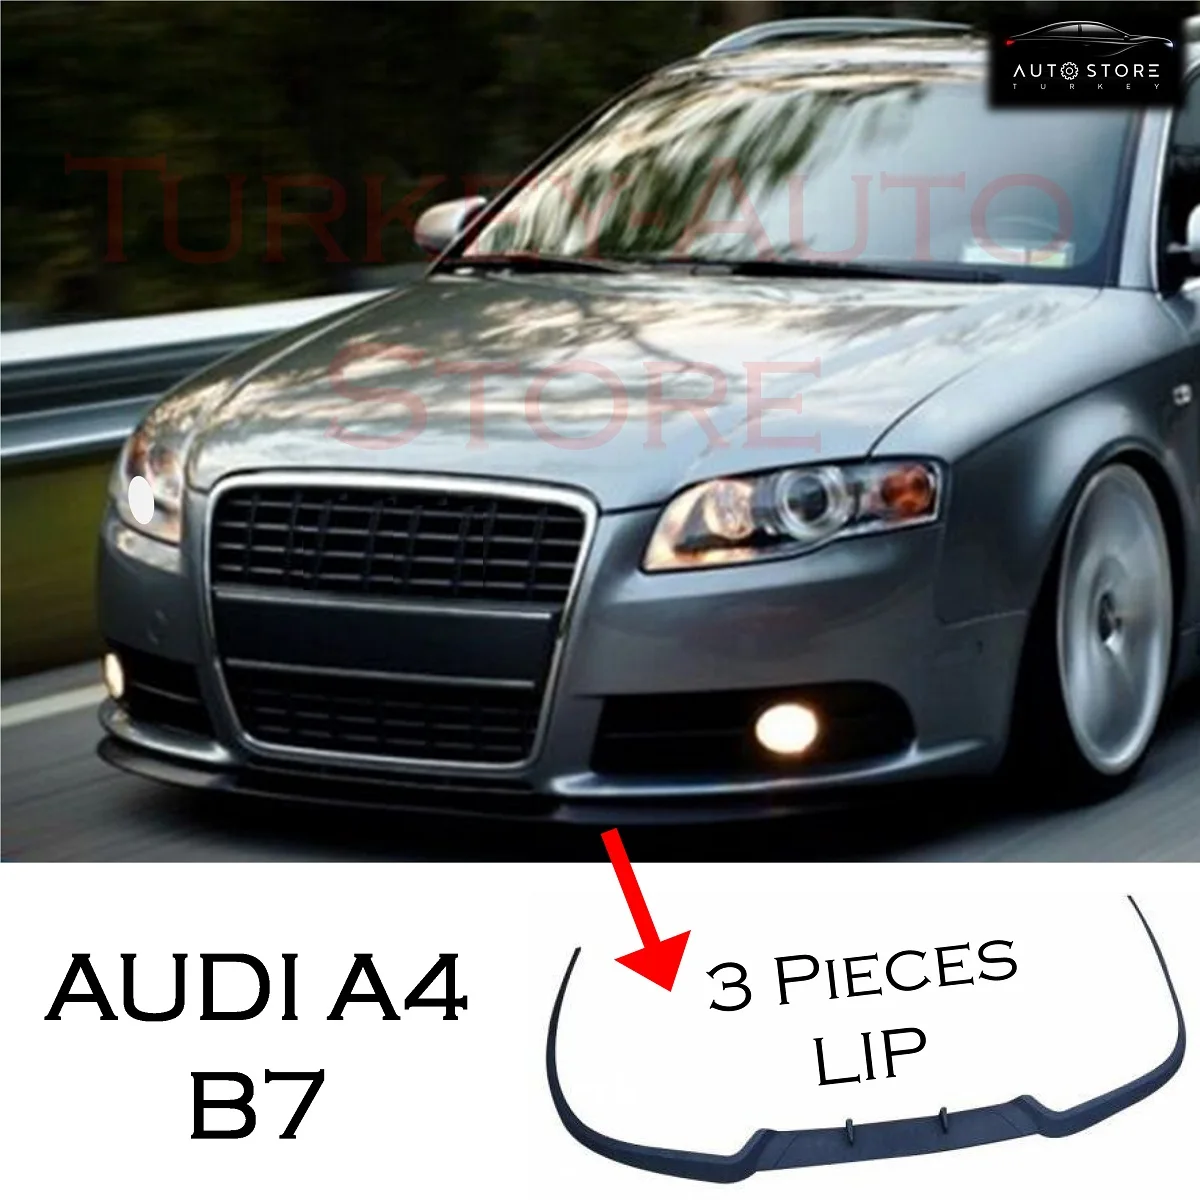 For Audi A4 B7 S4 RS4 FR Bumper Lip Car Accessories Automotive Products  Tuning Spoiler Universal Exterior Body Kit Front 3pcs AliExpress